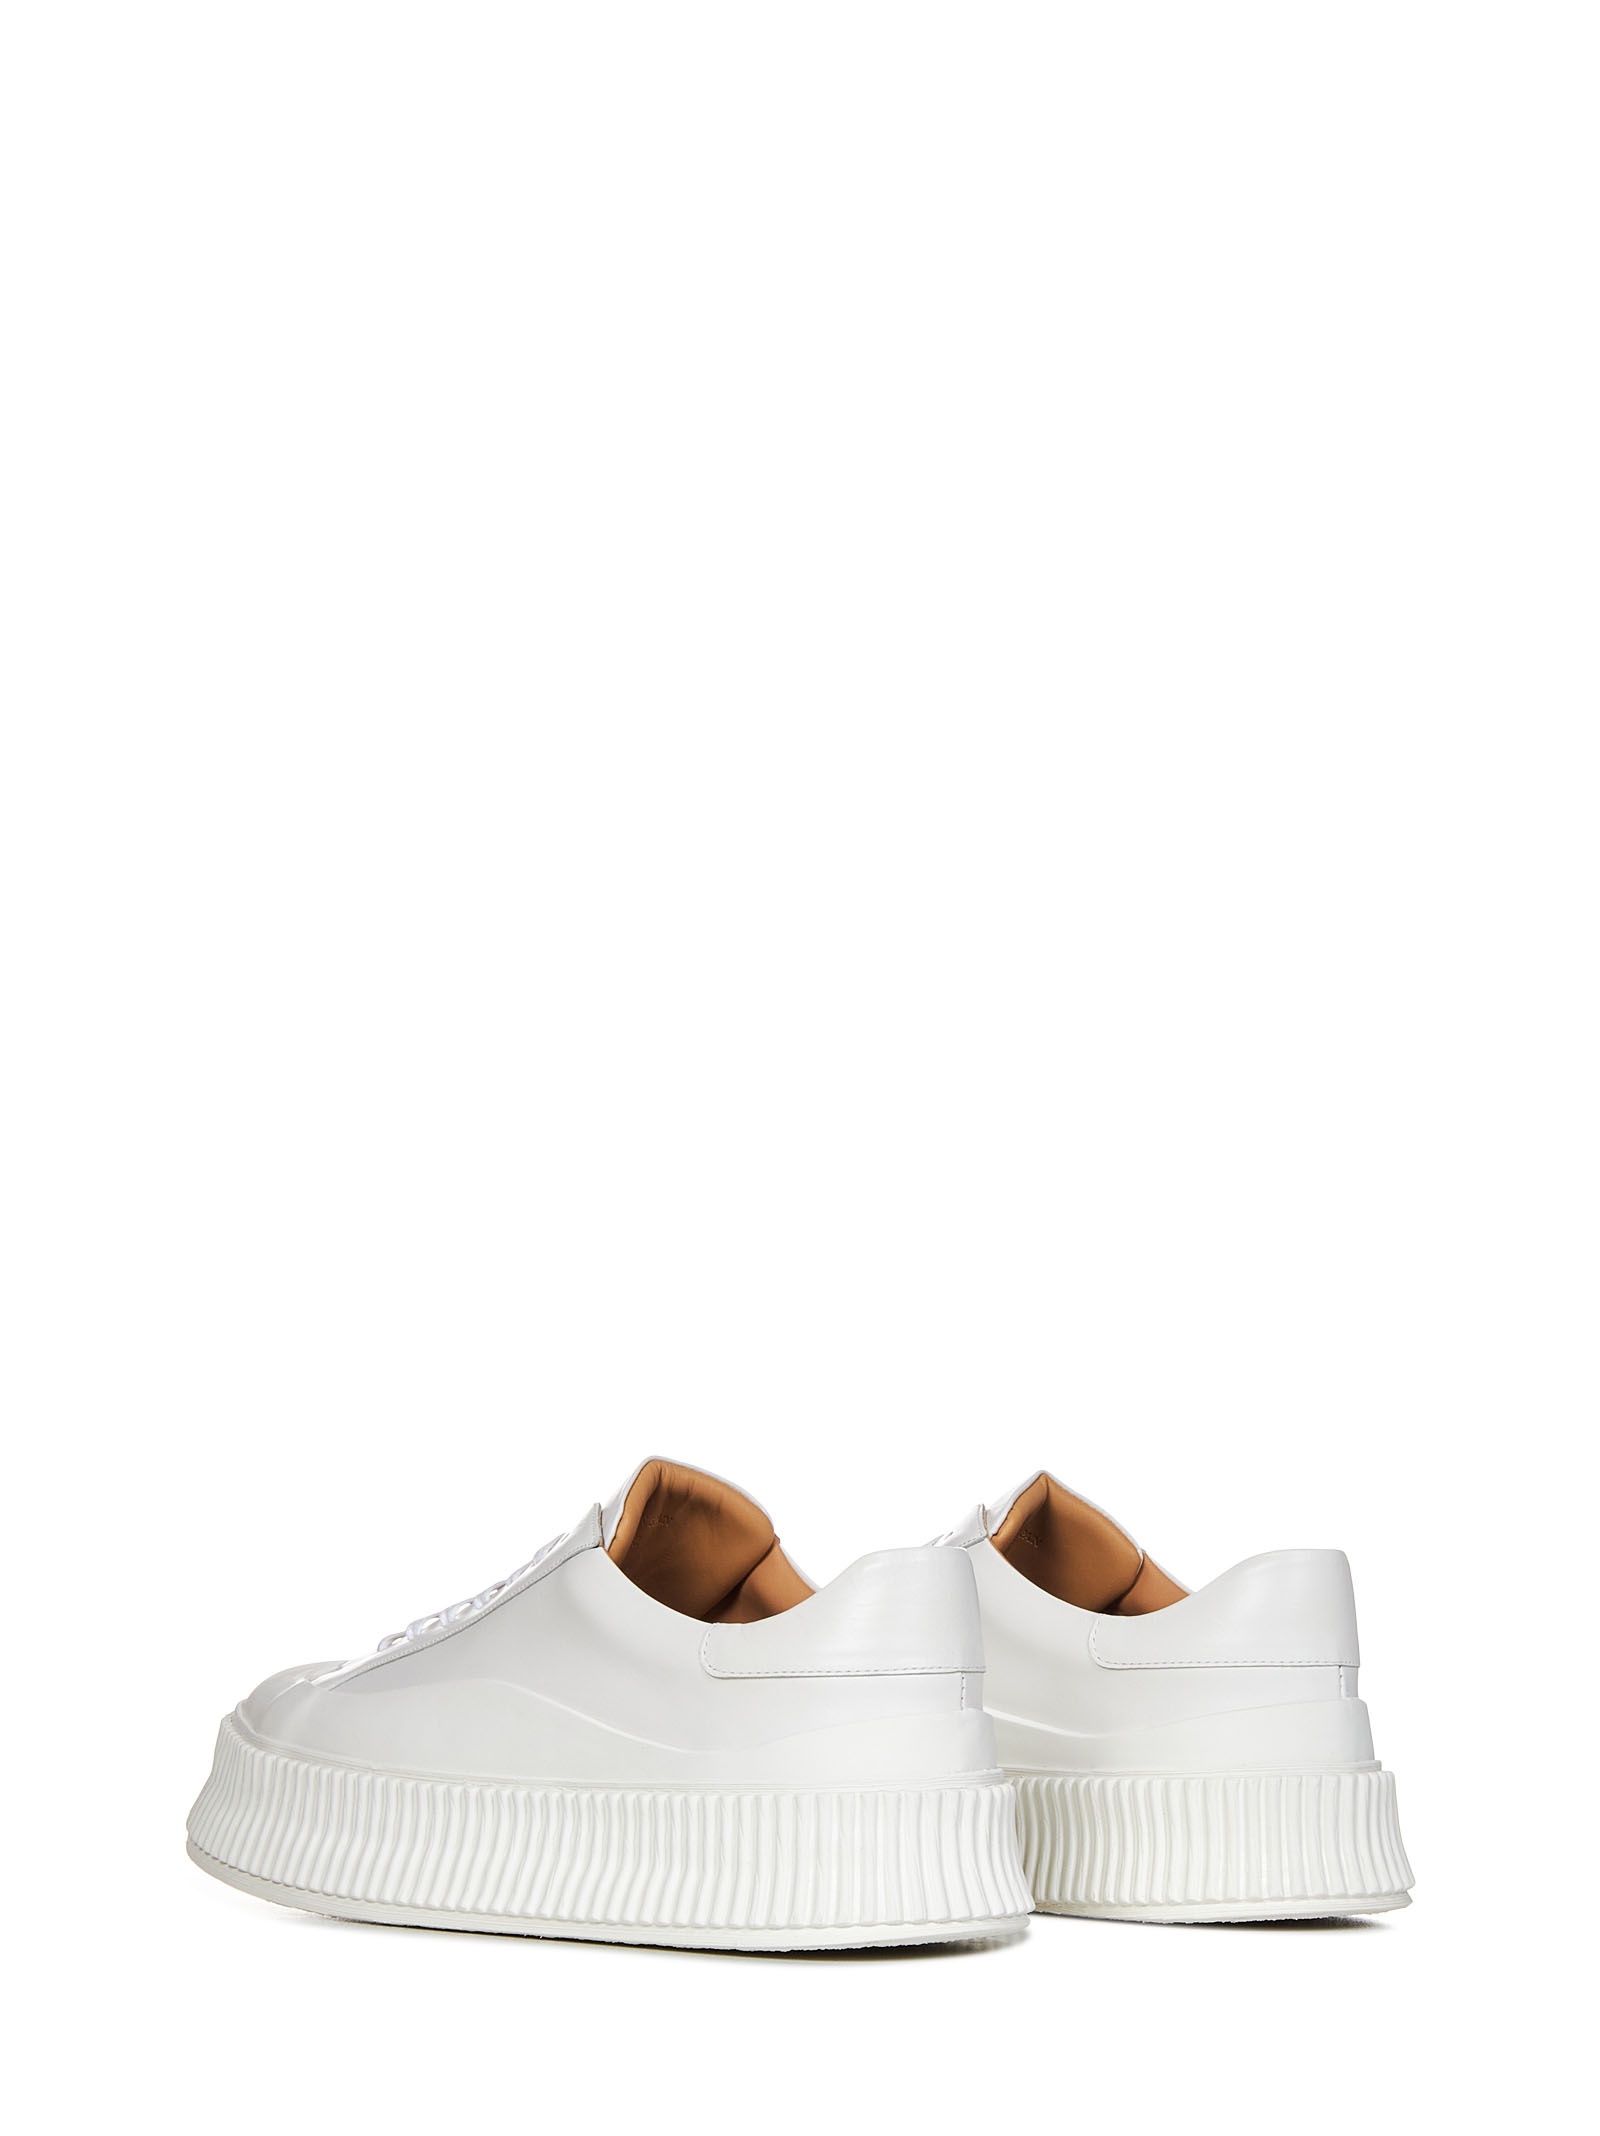 Snow-colored calfskin low-top sneakers with vulcanized rubber sole. - 3